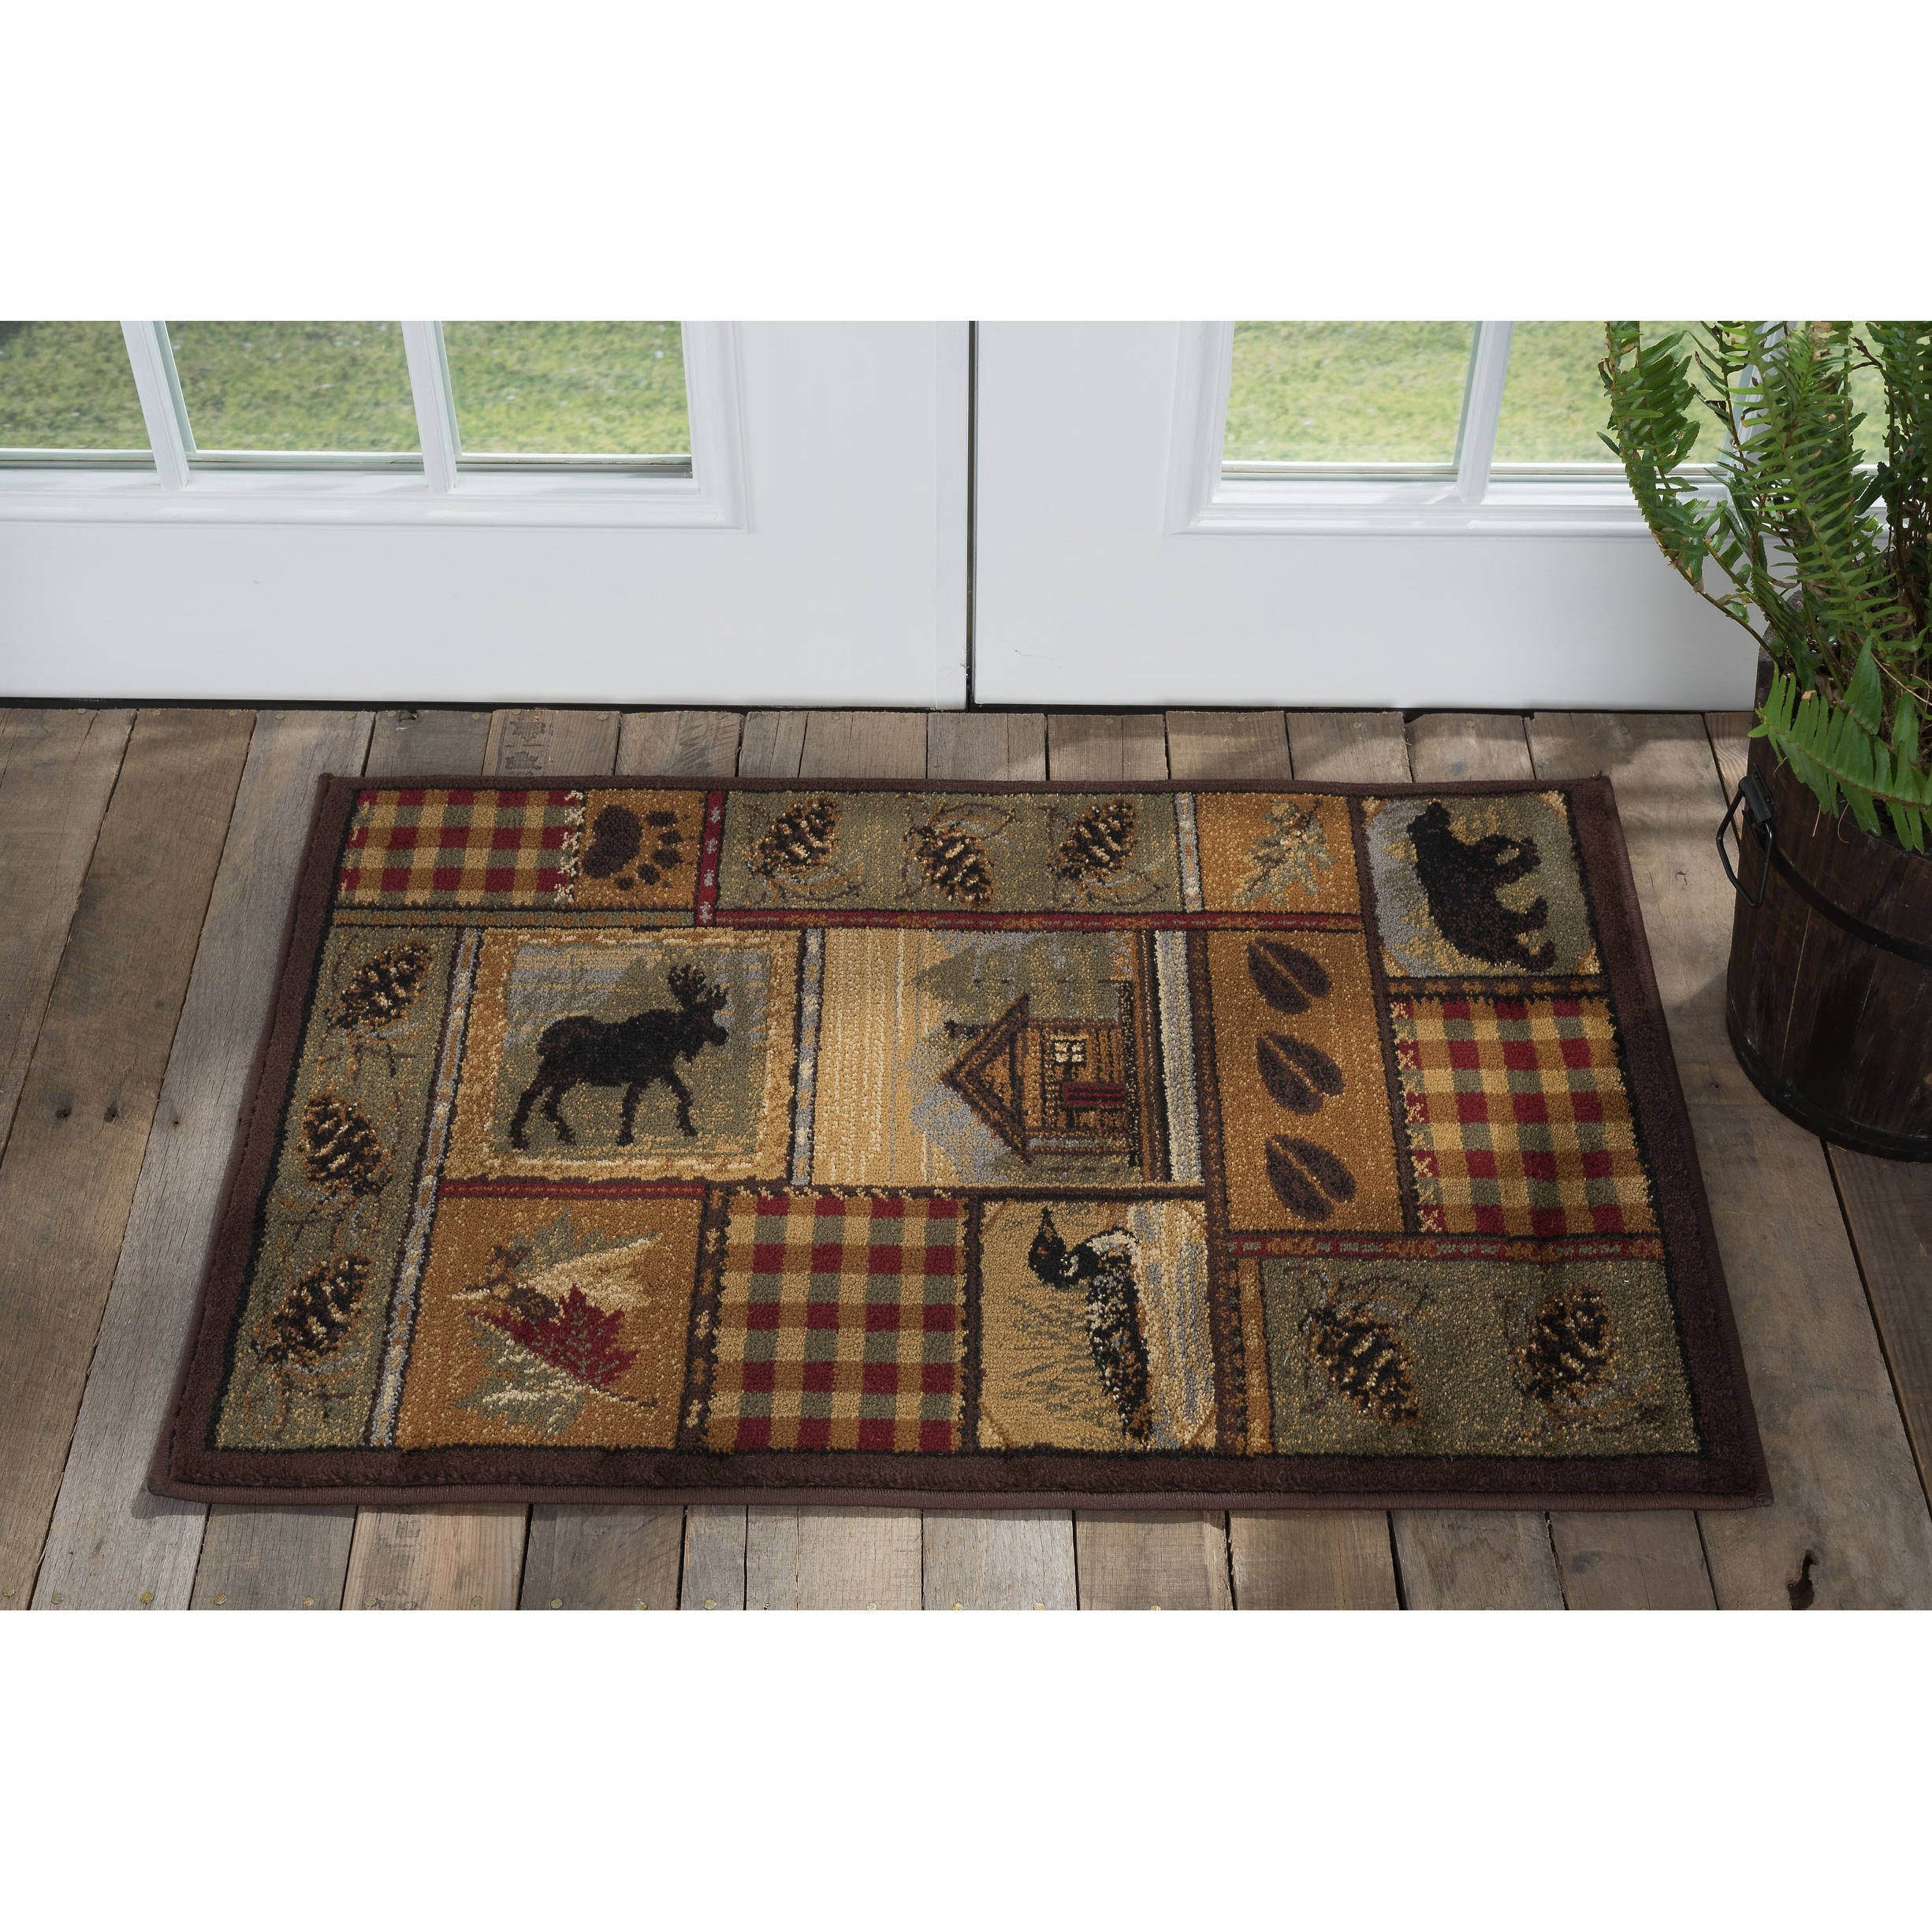 https://ak1.ostkcdn.com/images/products/is/images/direct/0e88891f2c77280b92fd3b3e8e0b571c54cb7cb5/Alise-Rugs-Natural-Lodge-Novelty-Lodge-Area-Rug.jpg